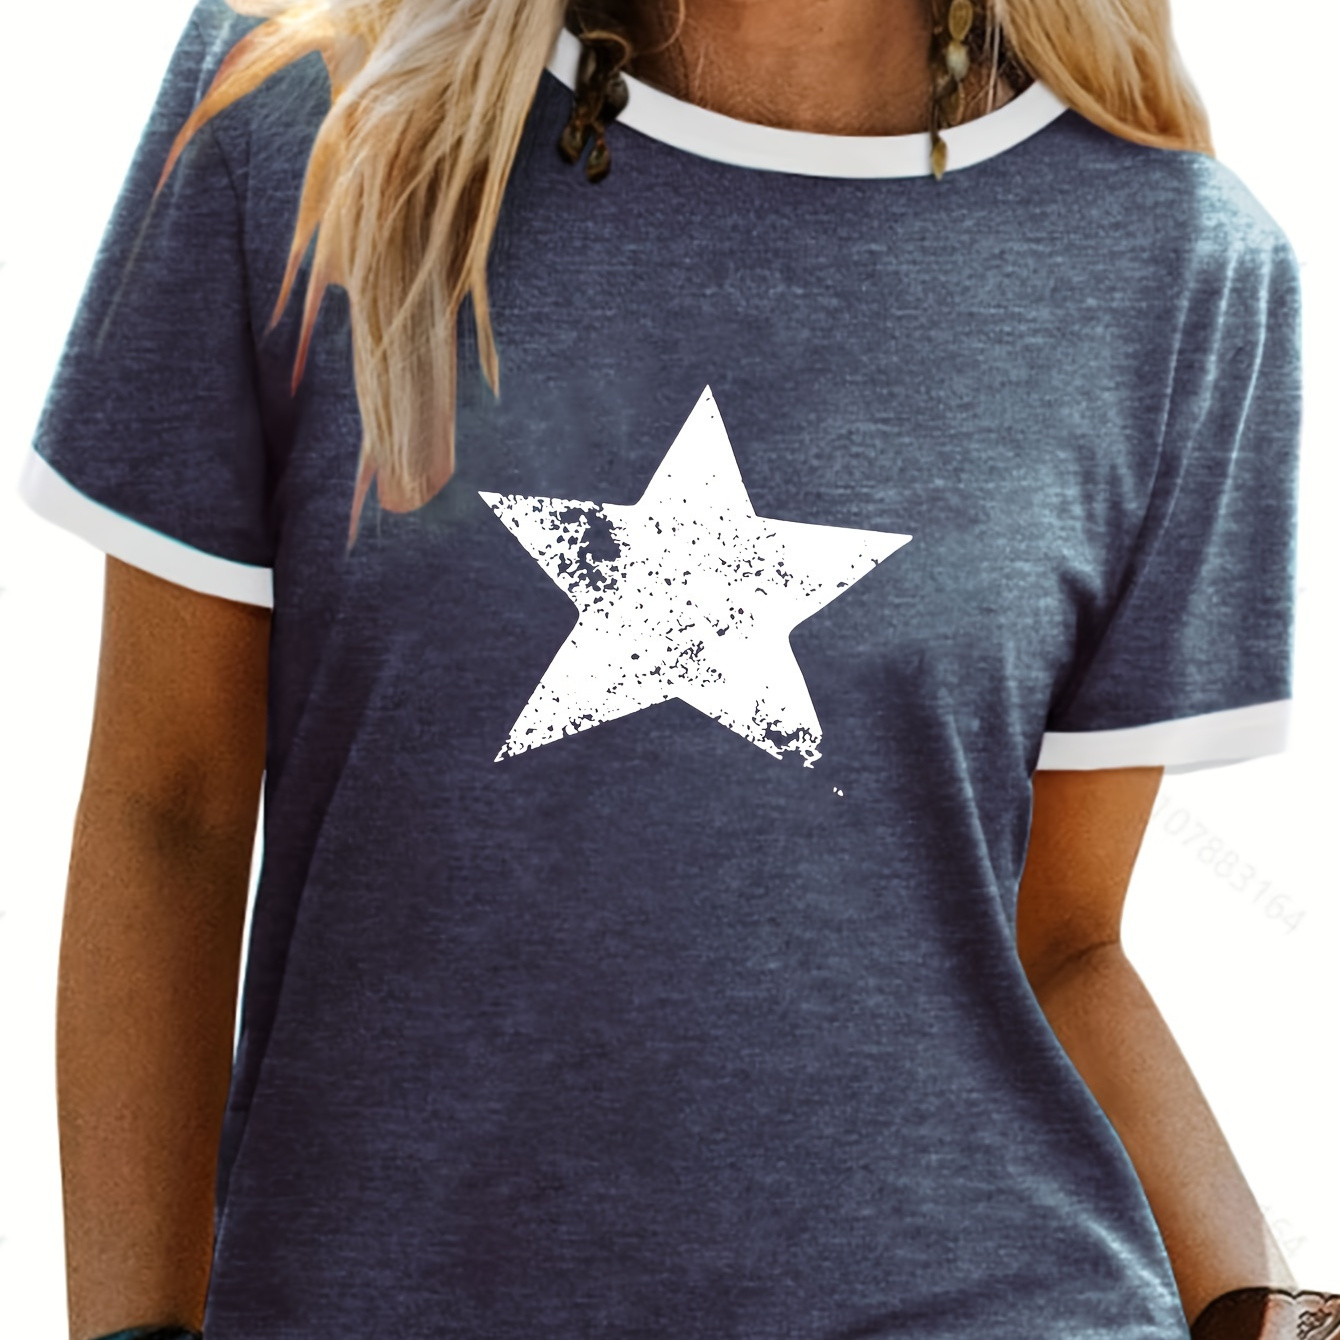 

Pentagram Print Contrast Color T-shirt, Short Sleeve Crew Neck Casual Top For Summer & Spring, Women's Clothing